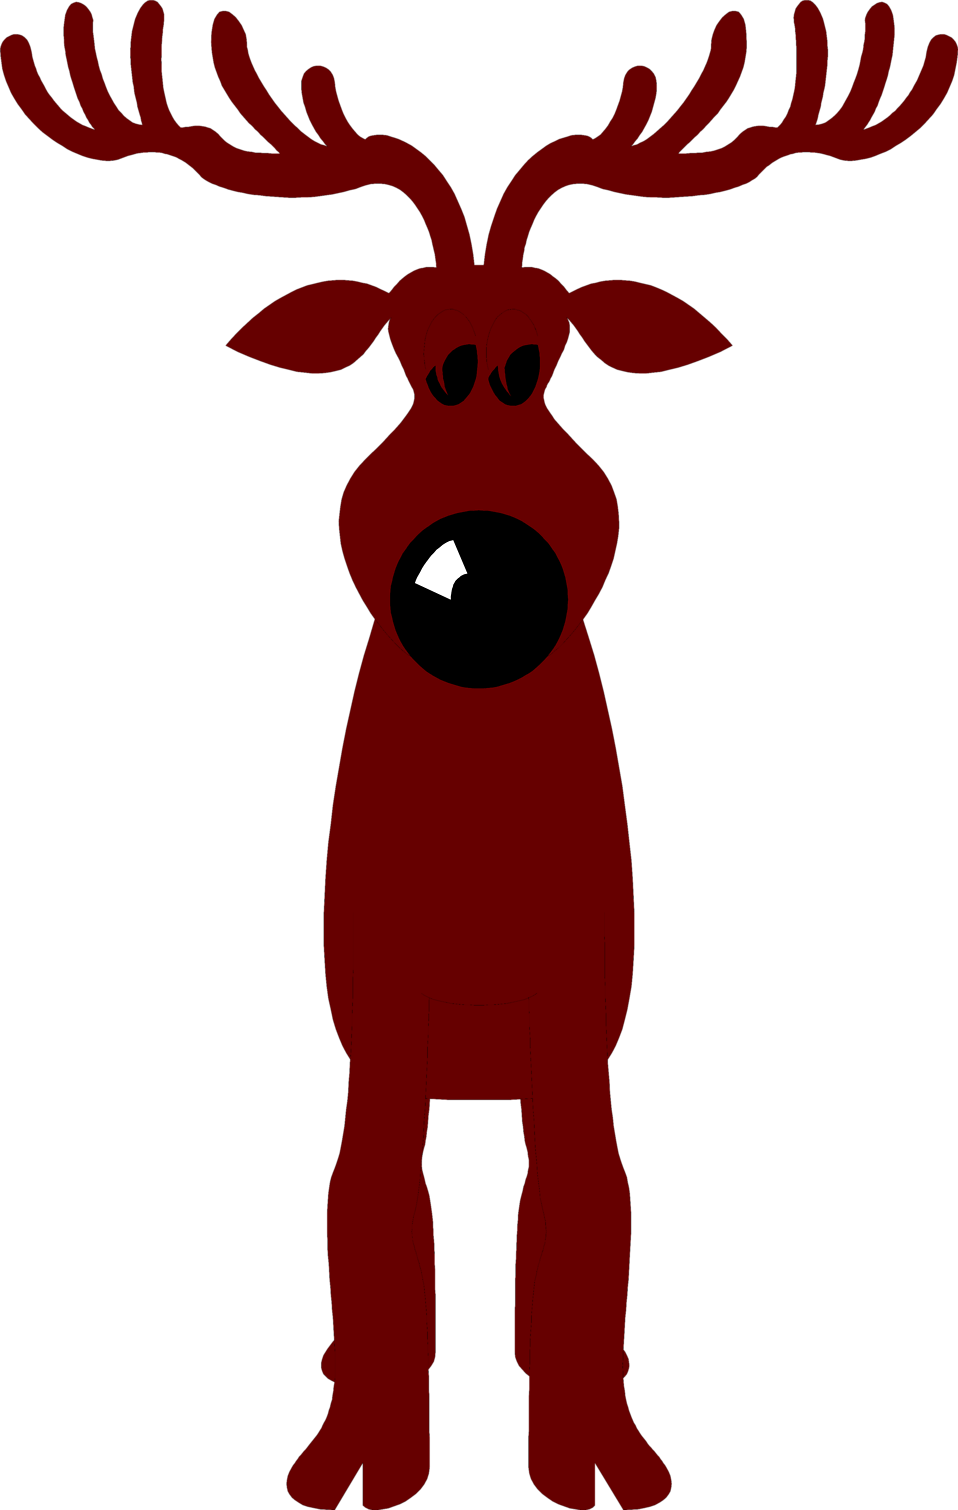 Illustration Of A Cartoon Reindeer - Rudolph The Red Nosed Reindeer (958x1510)